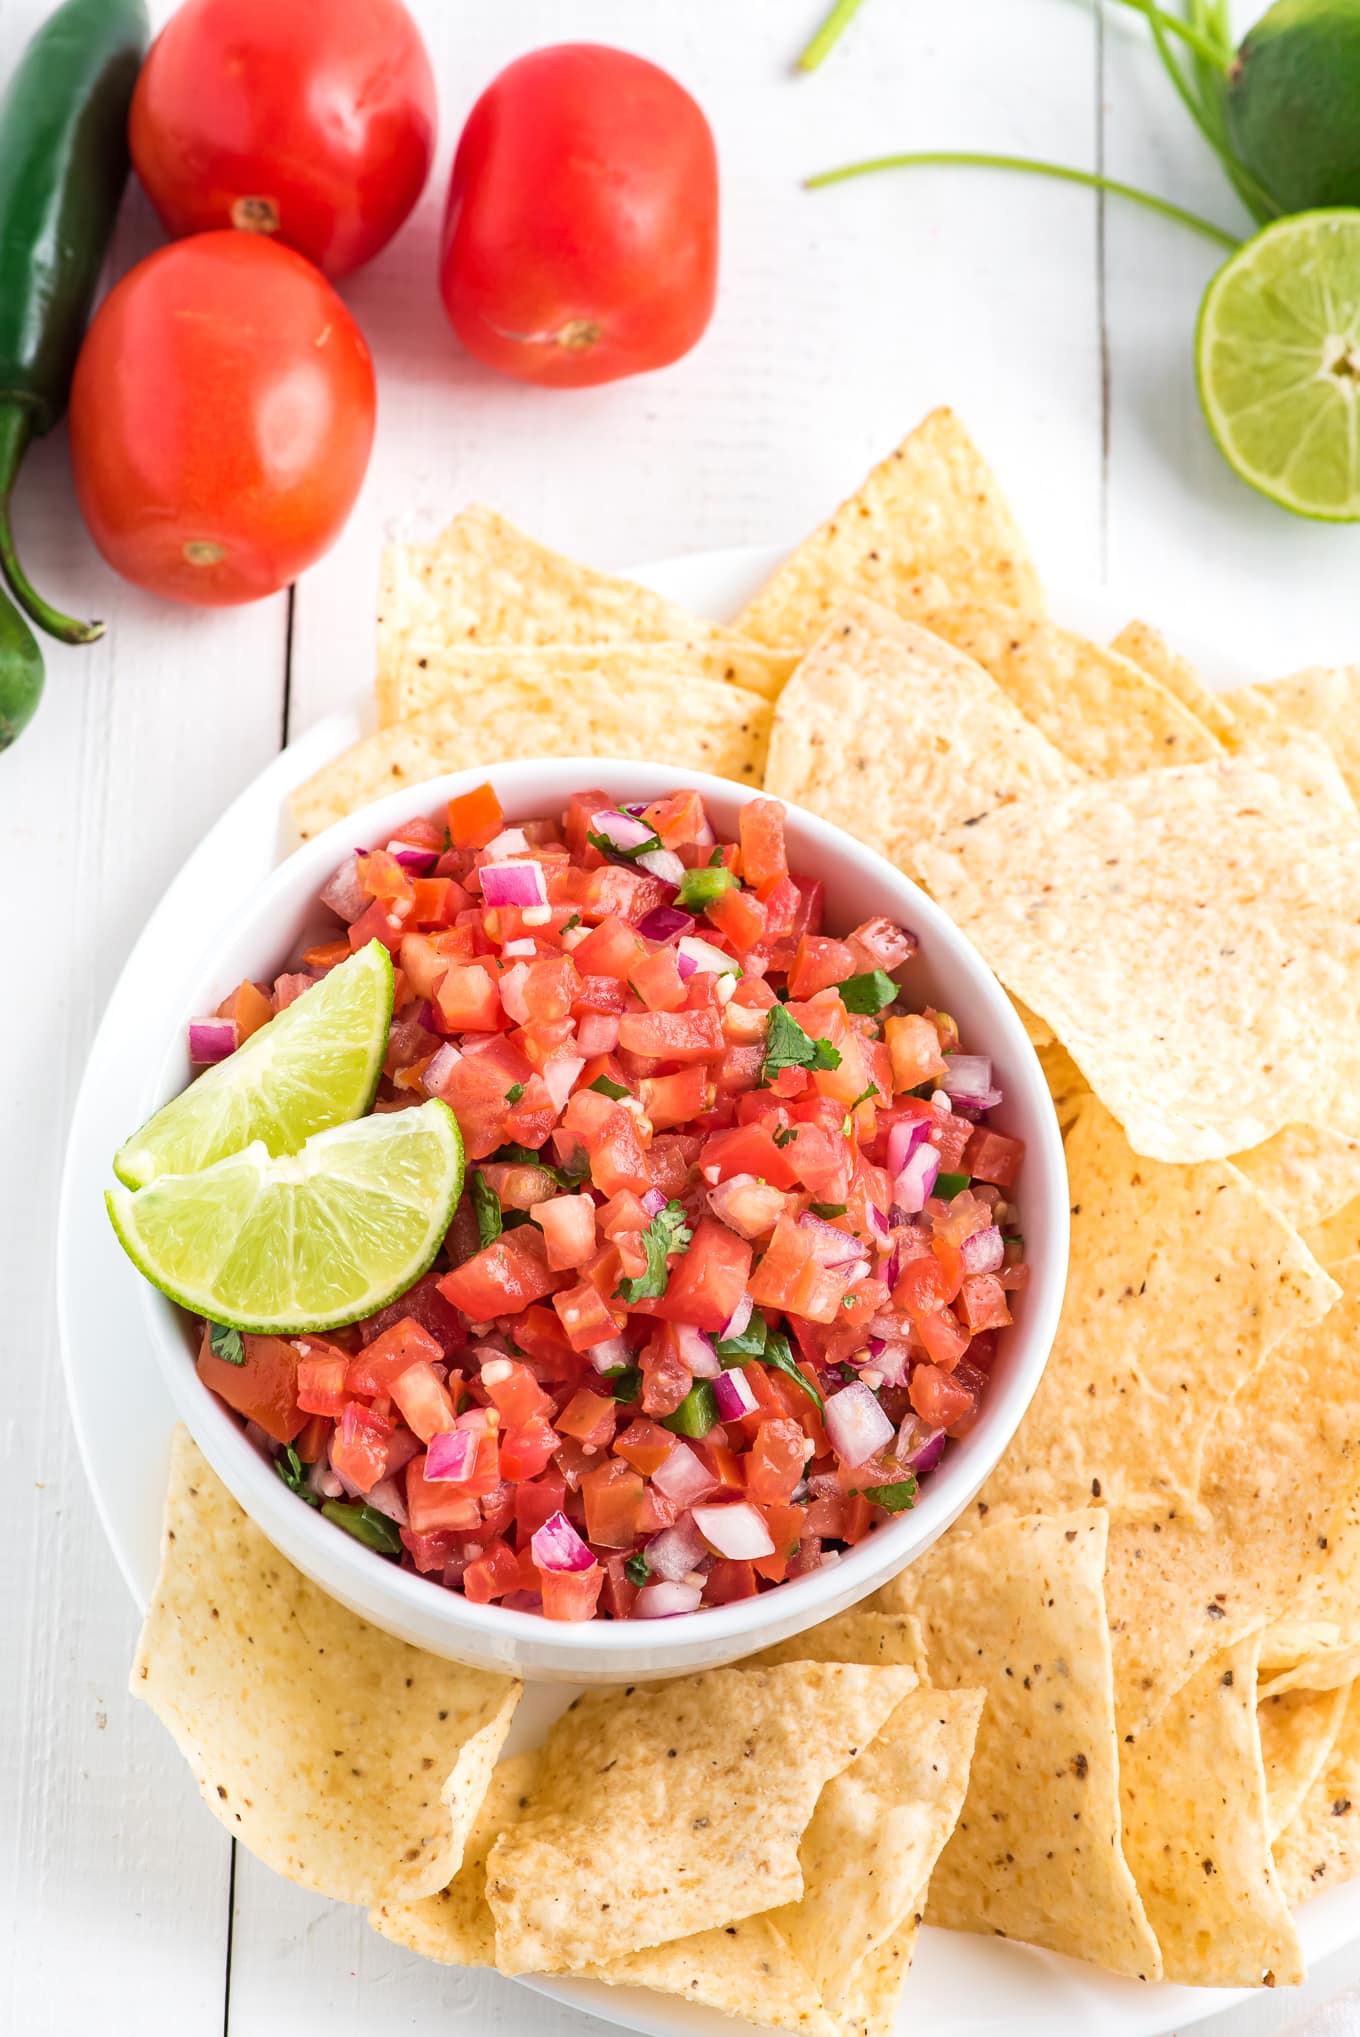 Tomato pico de gallo on a plate with chips and limes.